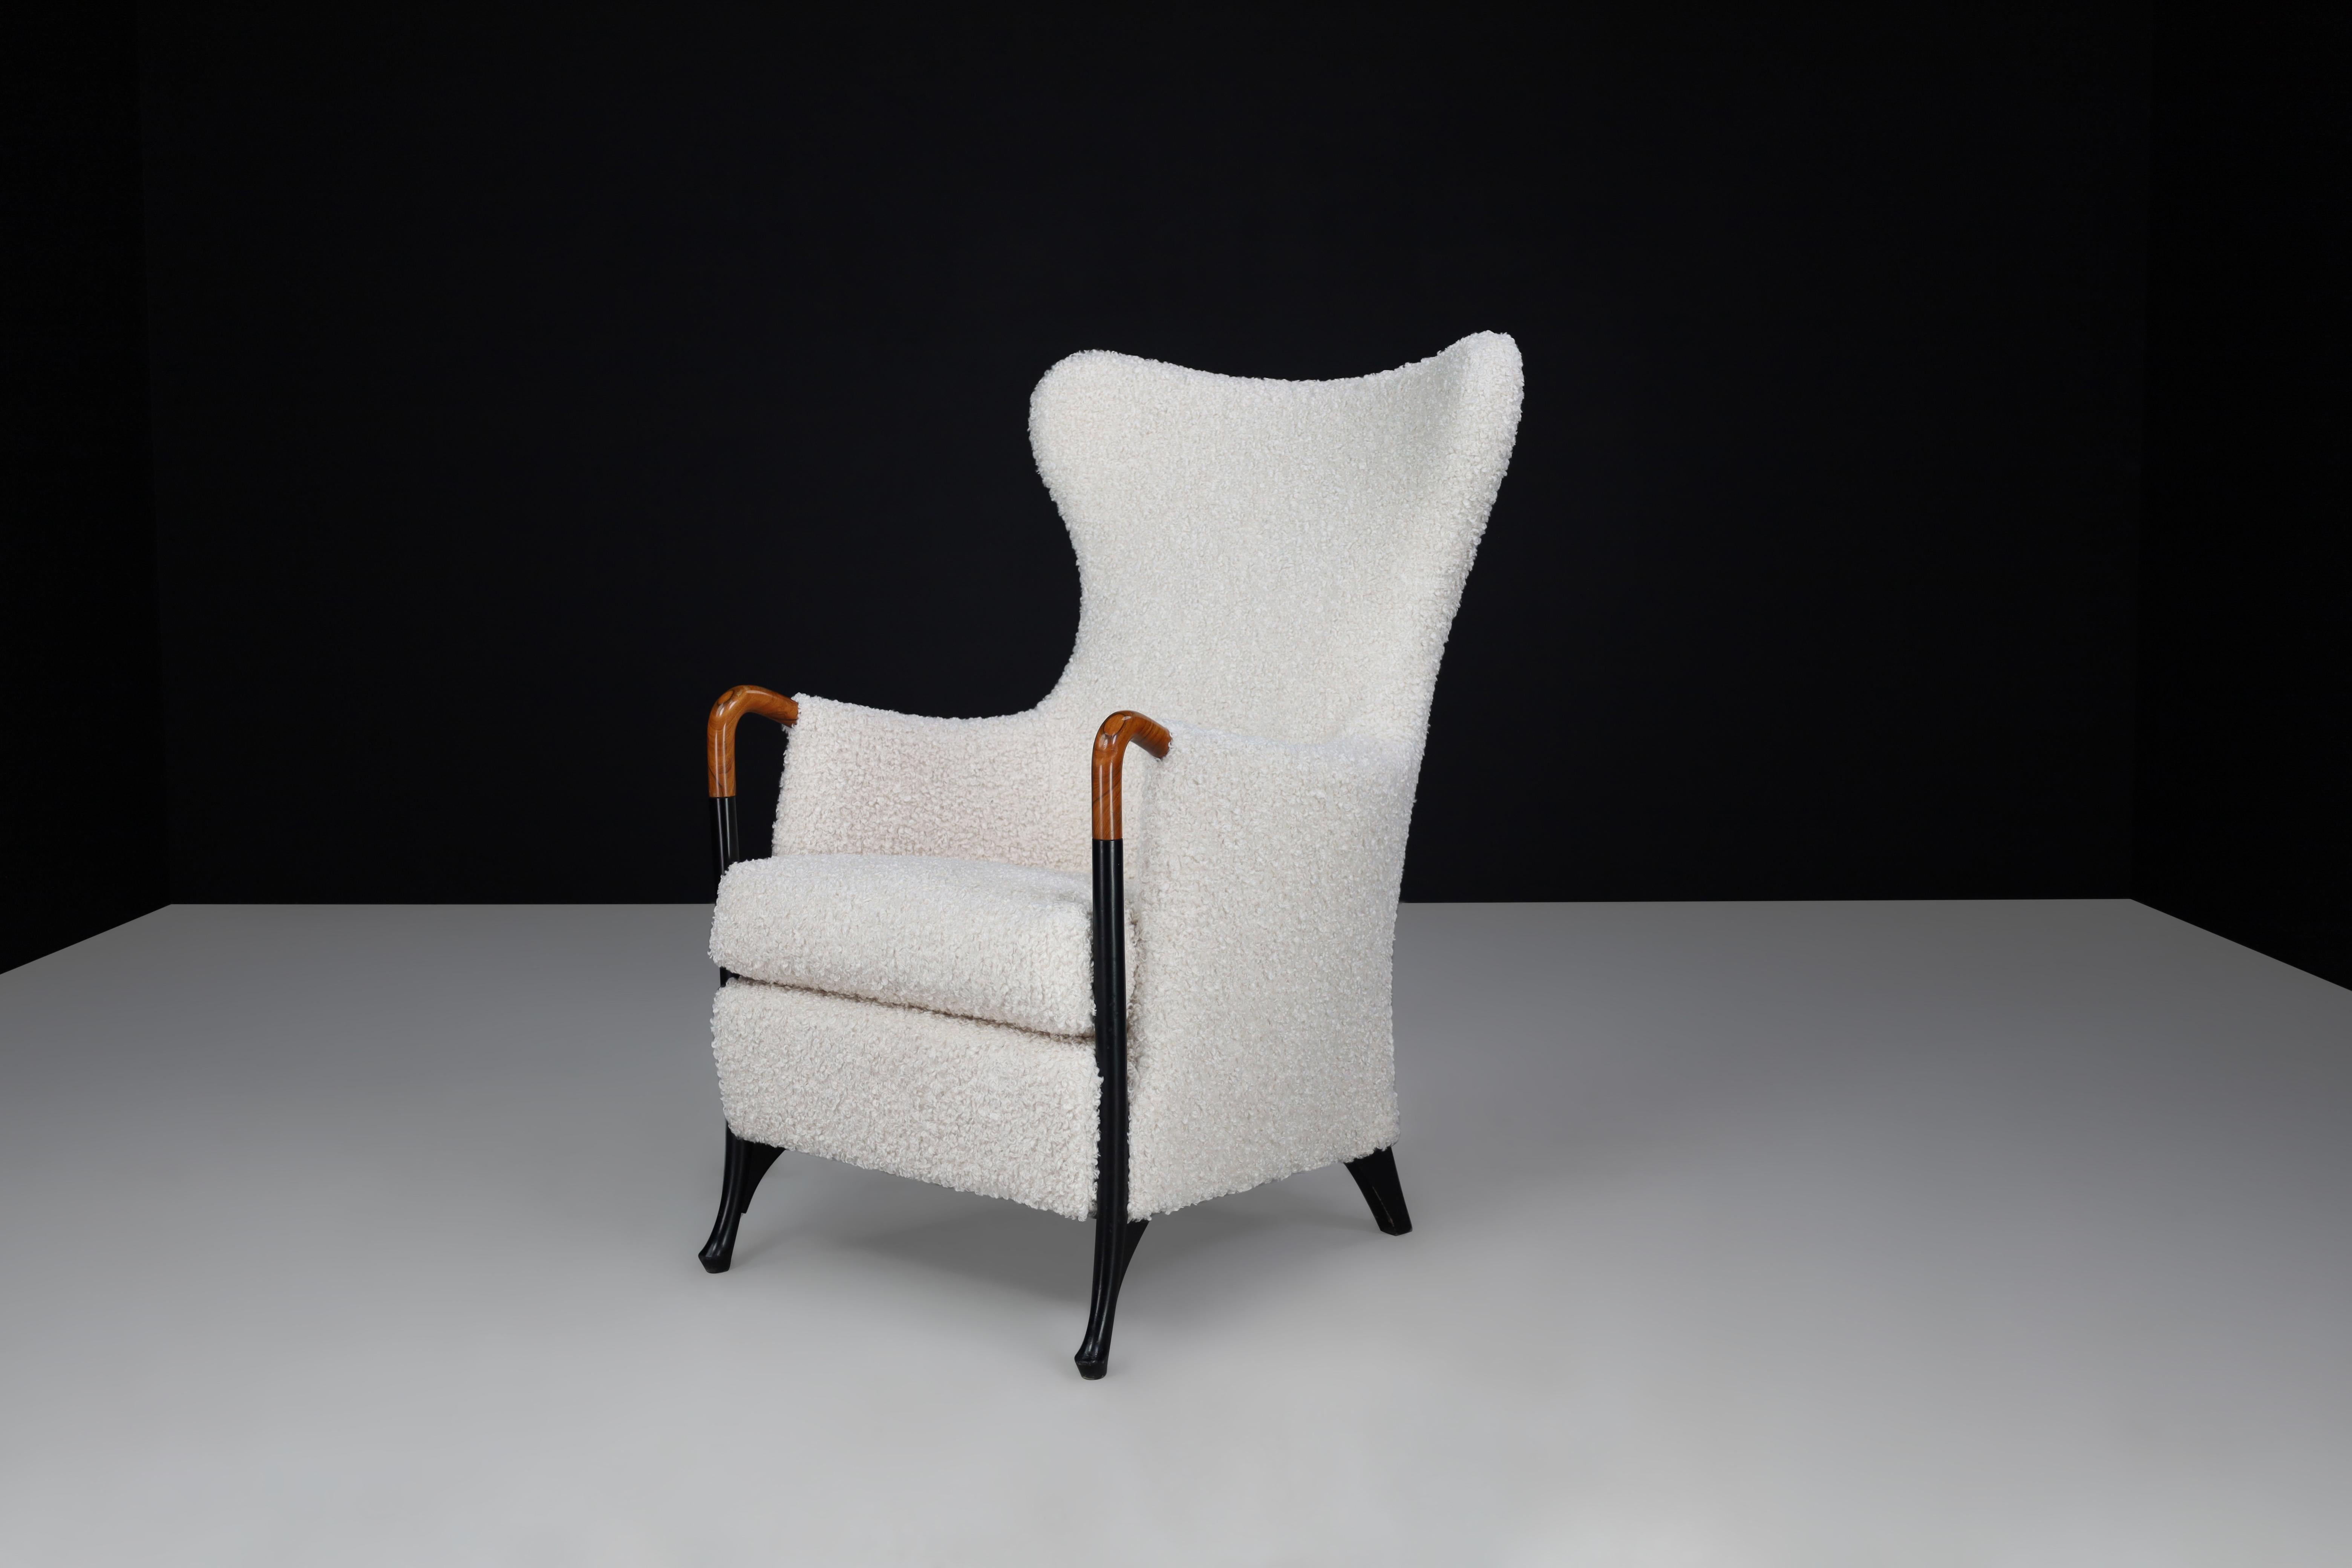 Umberto Asnago wingback chair for Giorgetti-Progetti, Italy, 1980s 

This is a beautiful wingback chair designed by Umberto Asnago for Giorgetti-Progetti in the 1980s. It has been upholstered with new fabric and features elegant curved wooden legs.